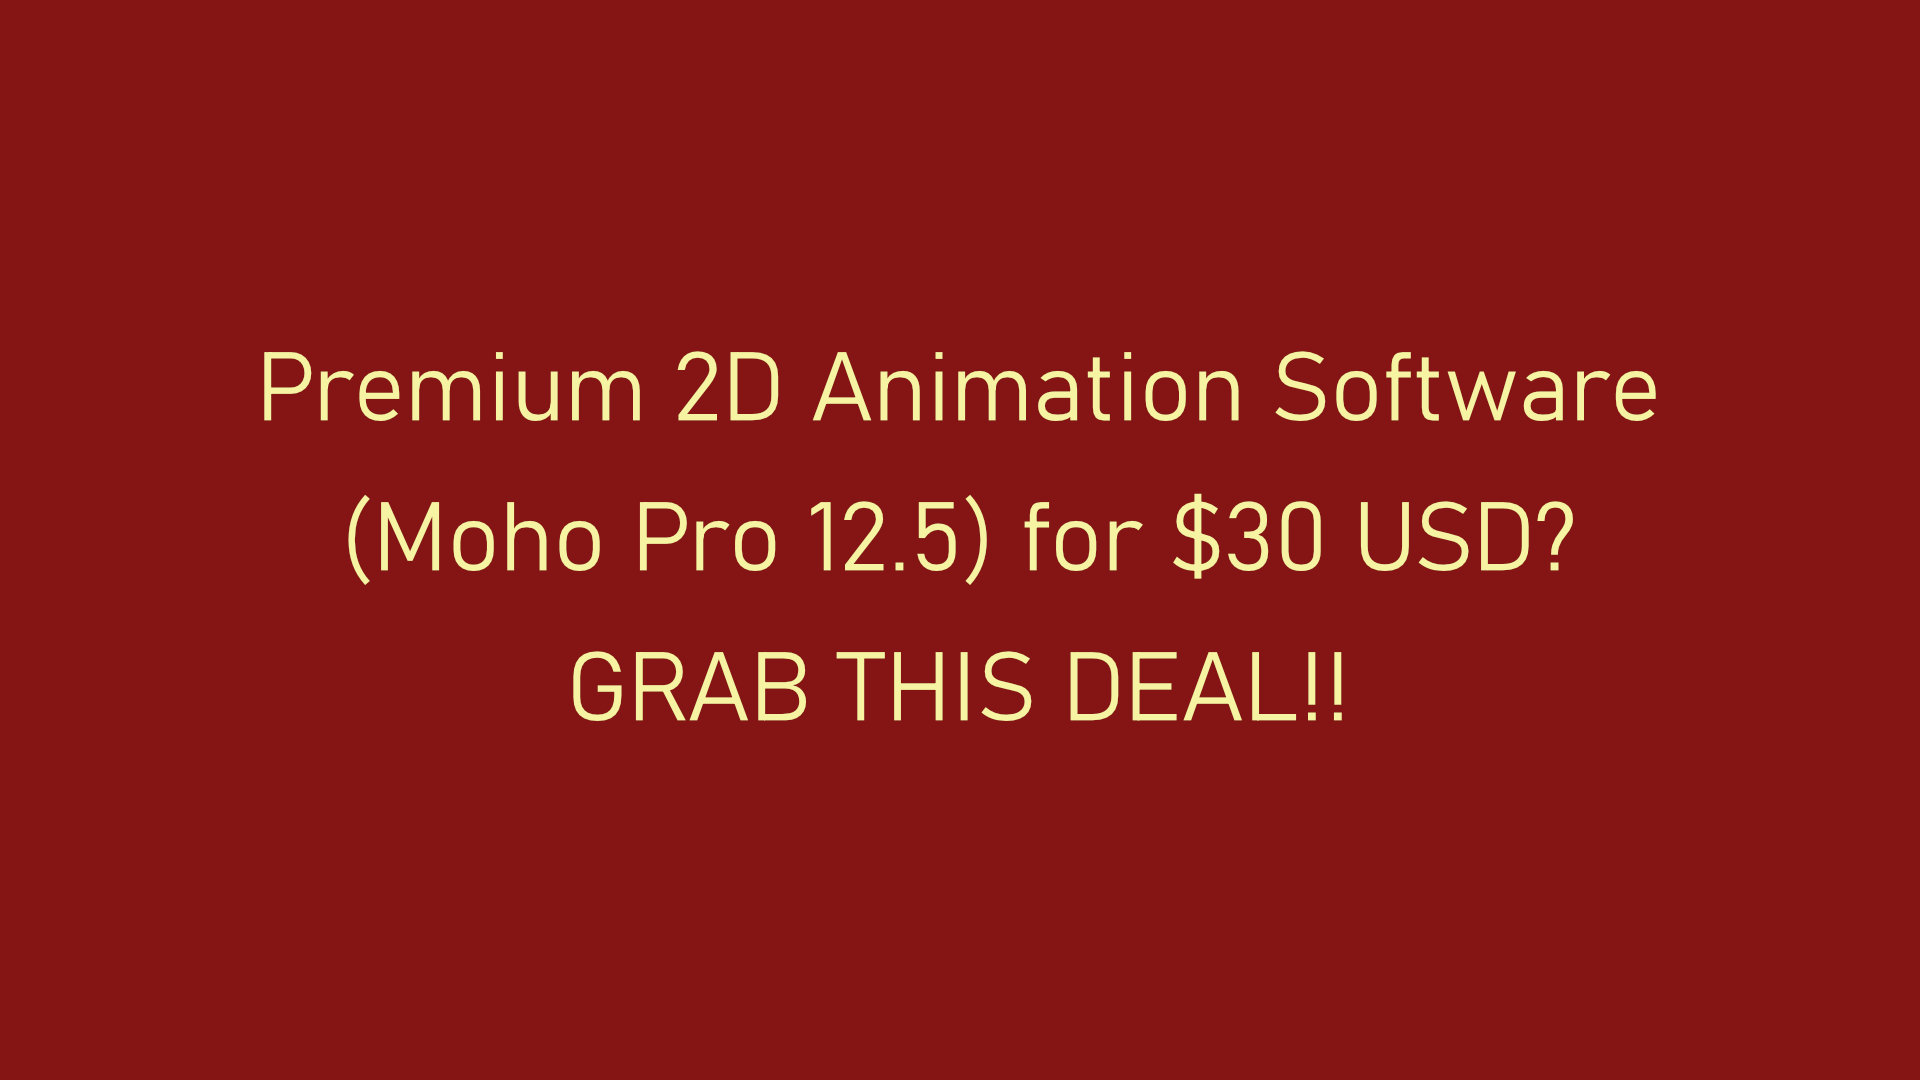 Premium 2D Animation Software (Moho Pro 12.5) for $30 USD? GRAB THIS DEAL!!